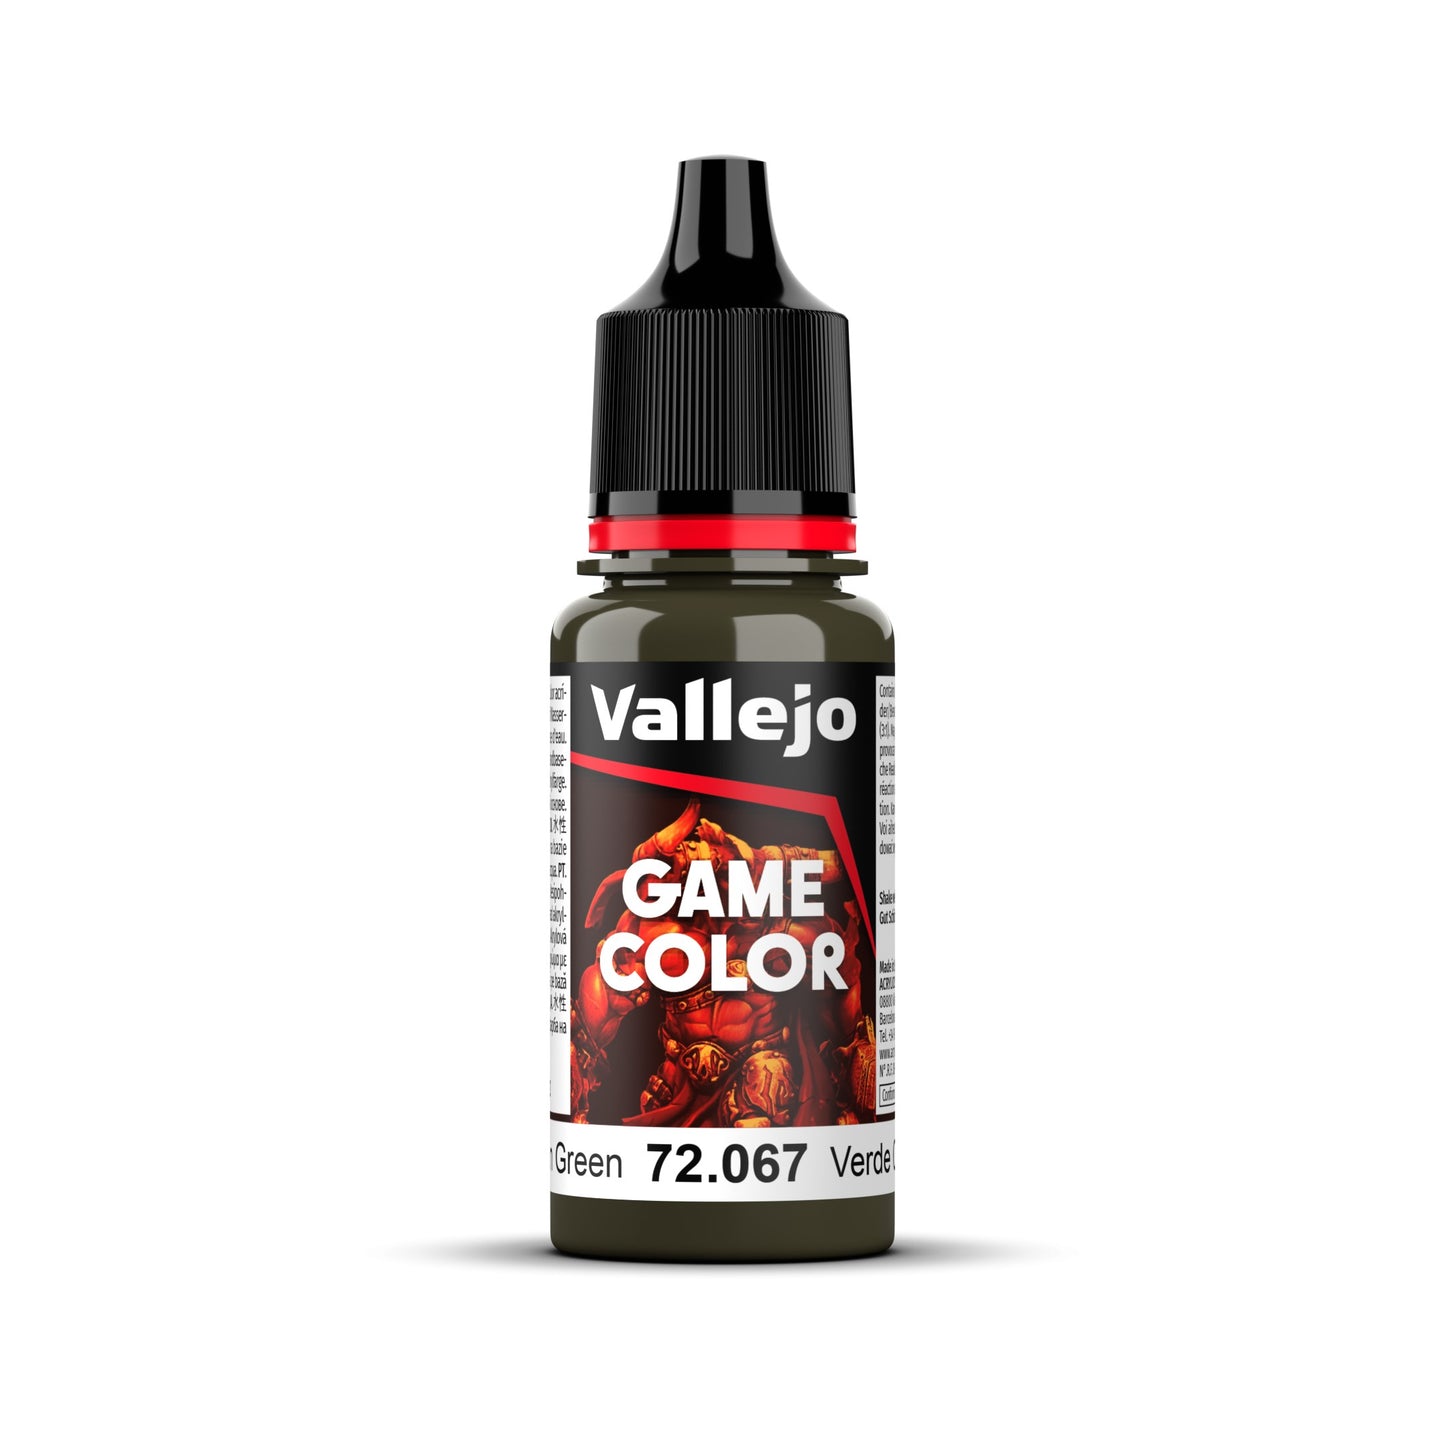 Vallejo Game Colour - Cayman Green 18ml